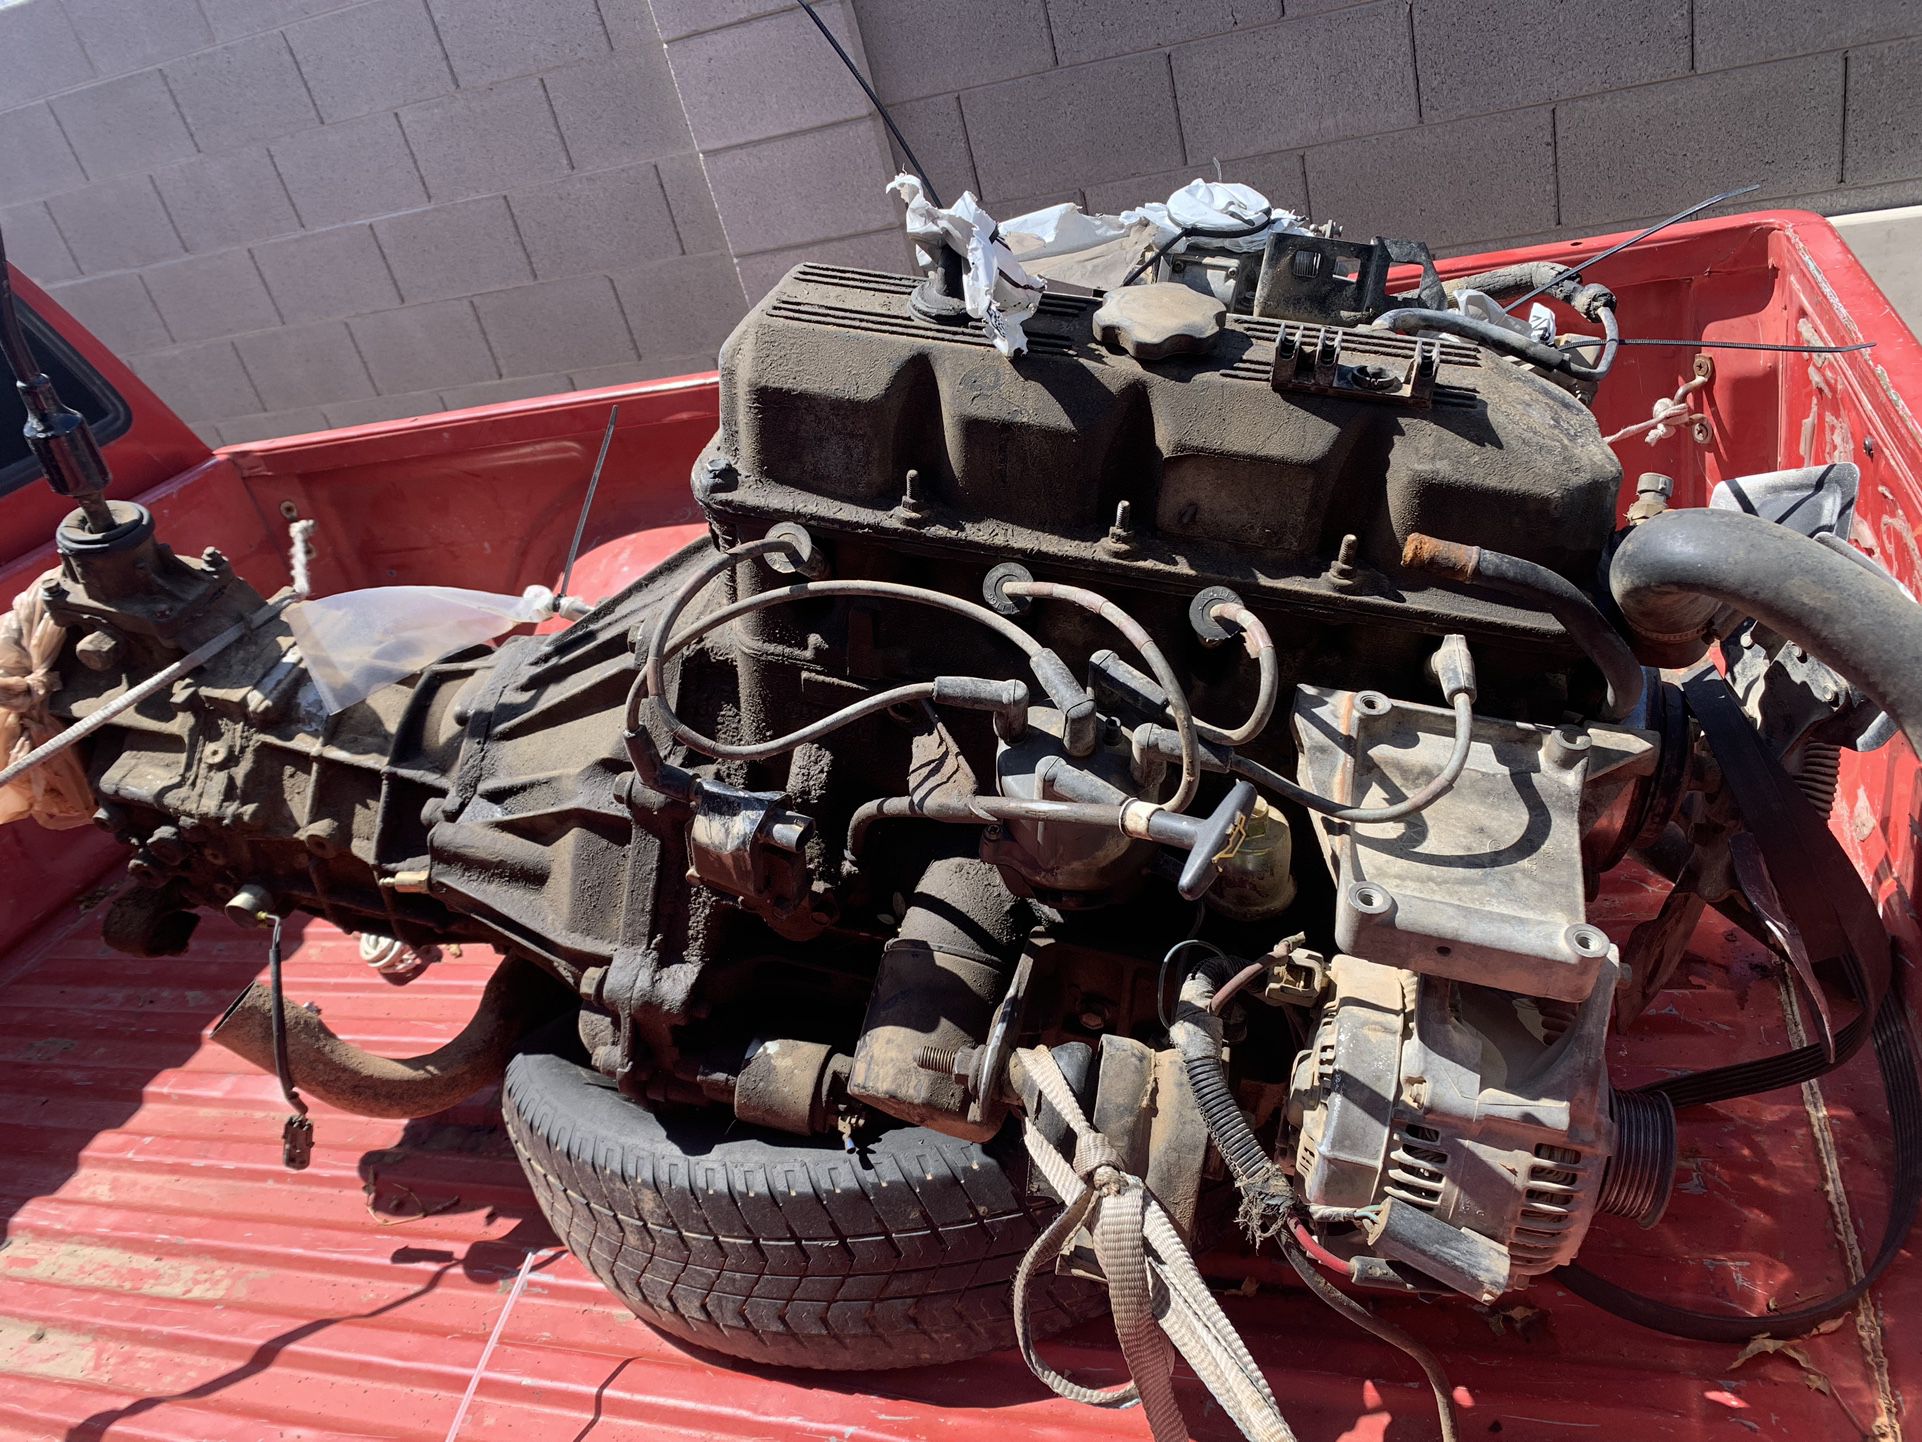 91 Jeep Wrangler Engine And Transmission for Sale in Phoenix, AZ - OfferUp